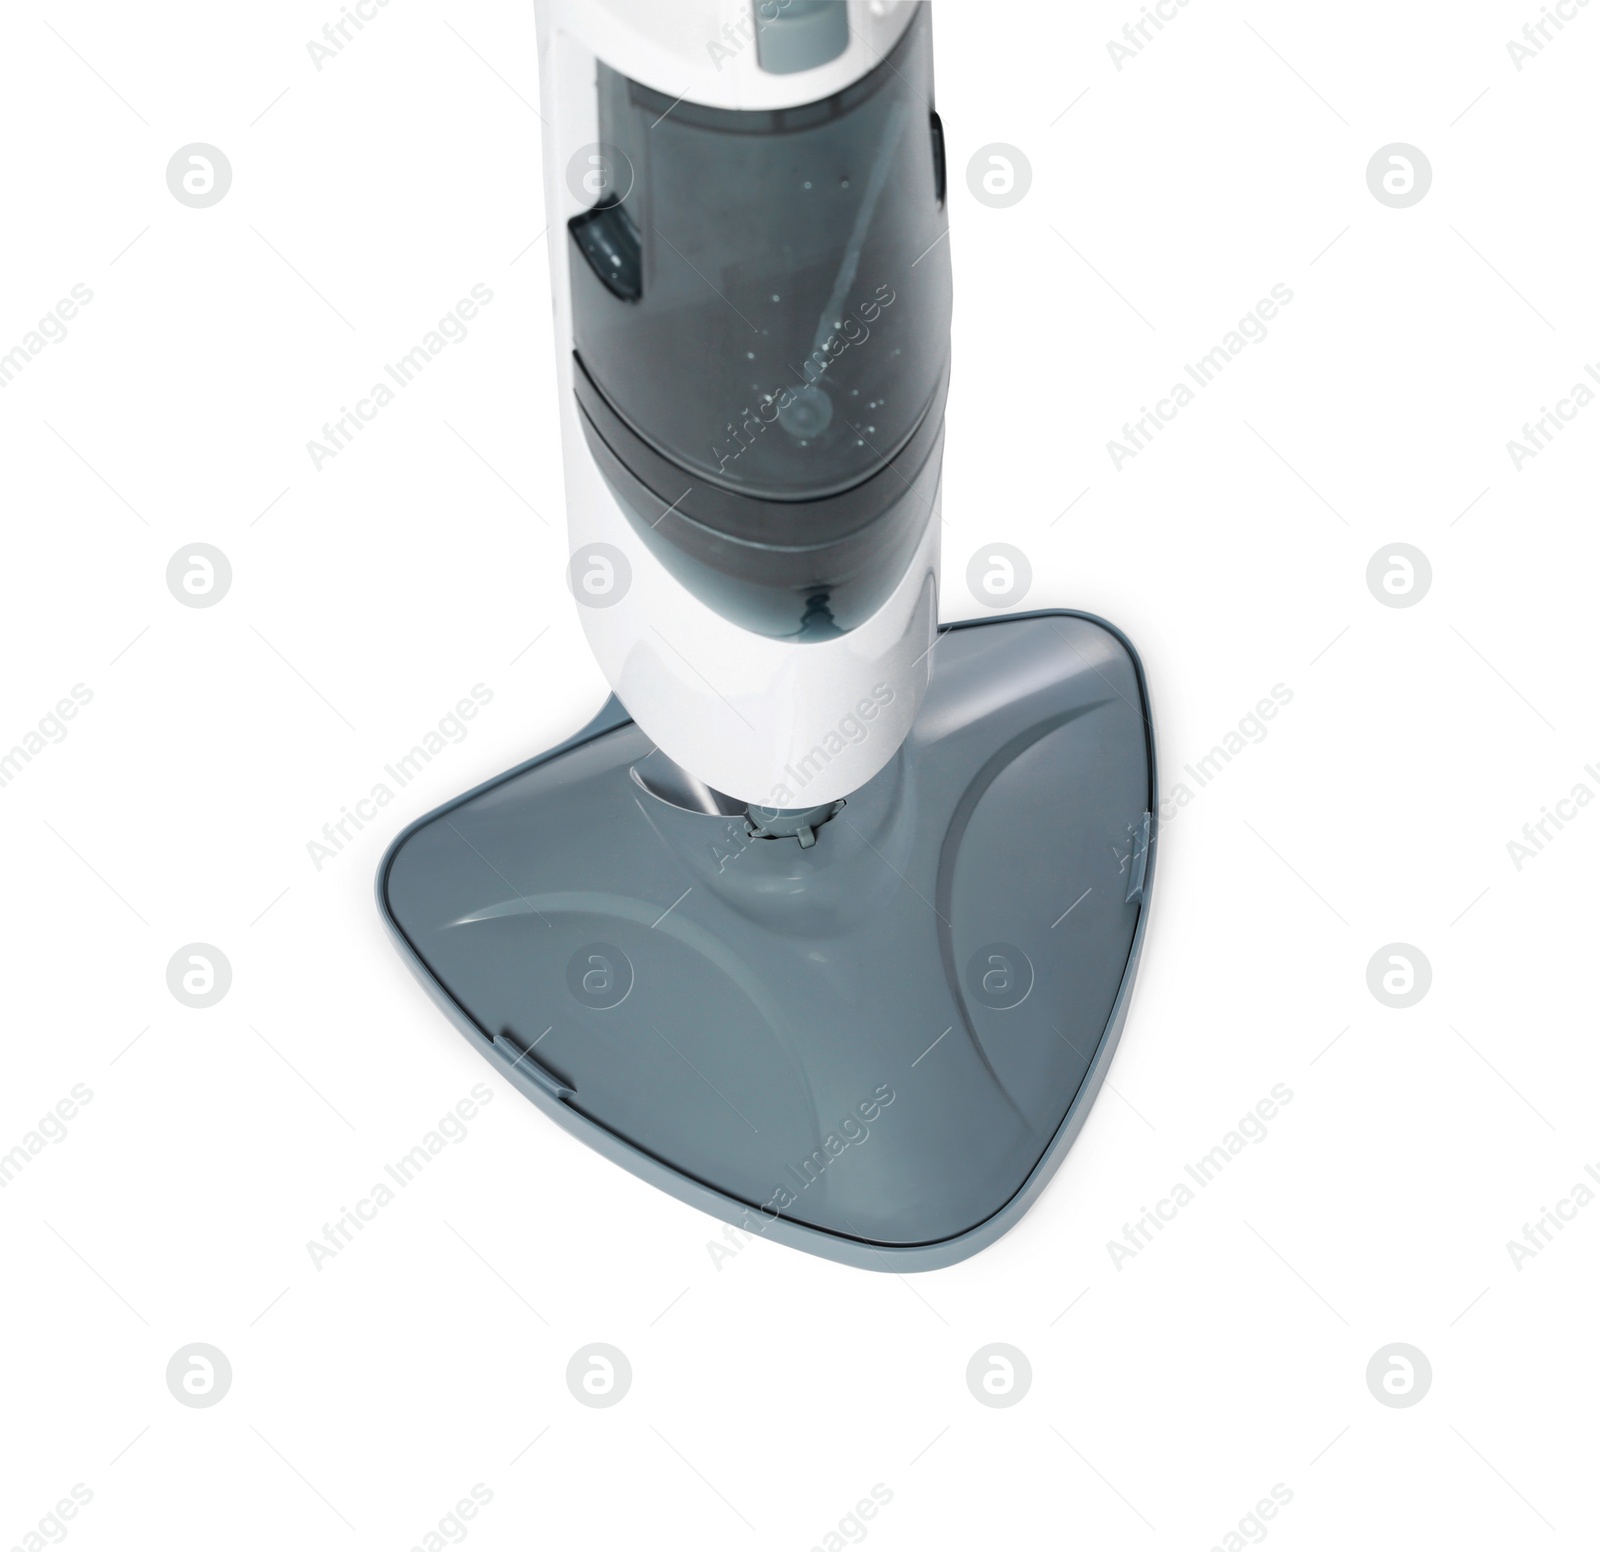 Photo of One modern steam mop isolated on white